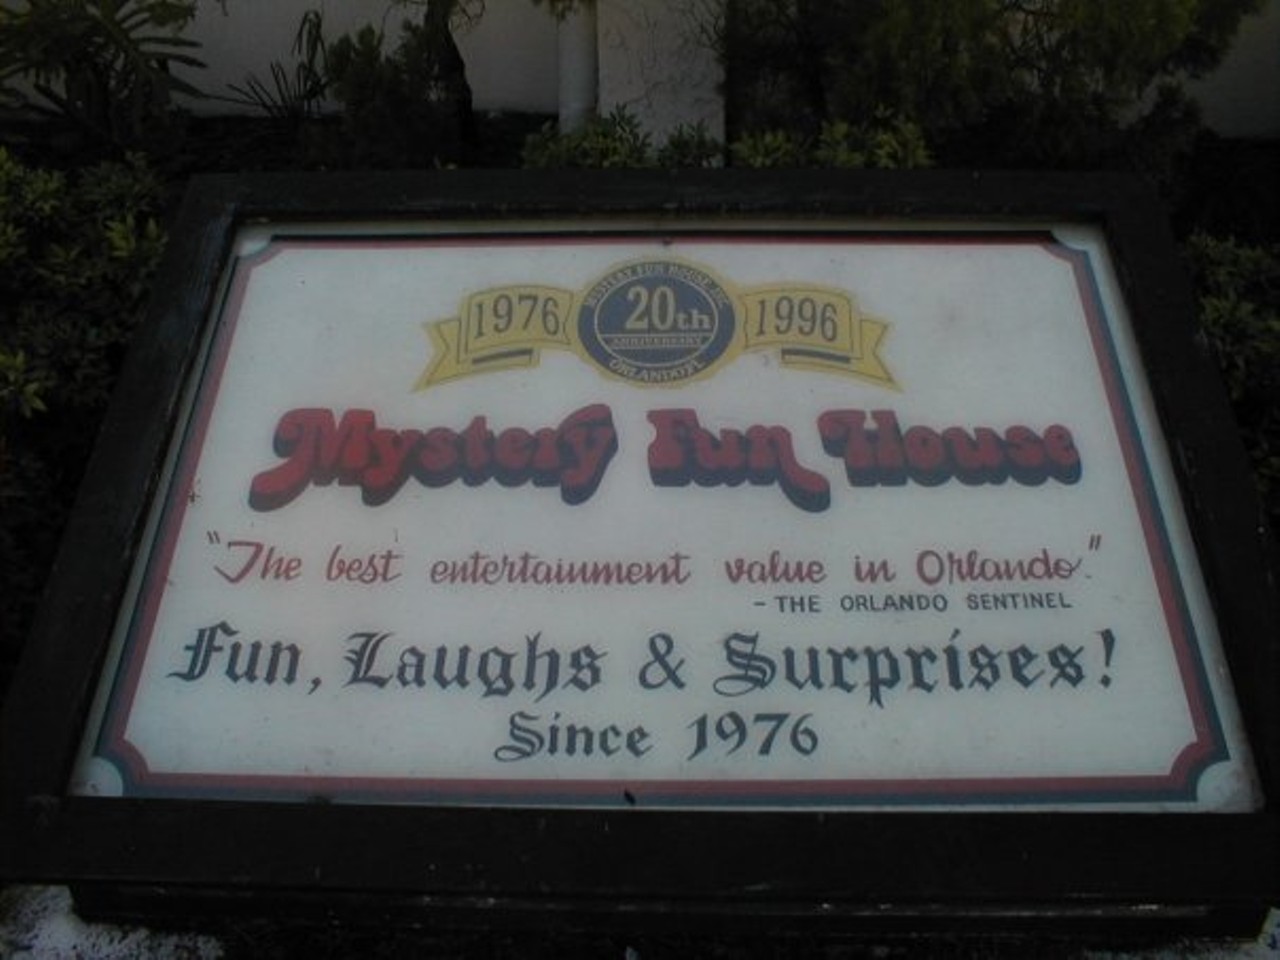 It opened in 1976, and was owned in part by local developer David Siegel. Yes, THAT David Siegel. And this one, too. It promised fun, laughs and surprises, including a mirror maze, fortune telling and a magic show. (image via facebook.com/mysteryfunhouse)